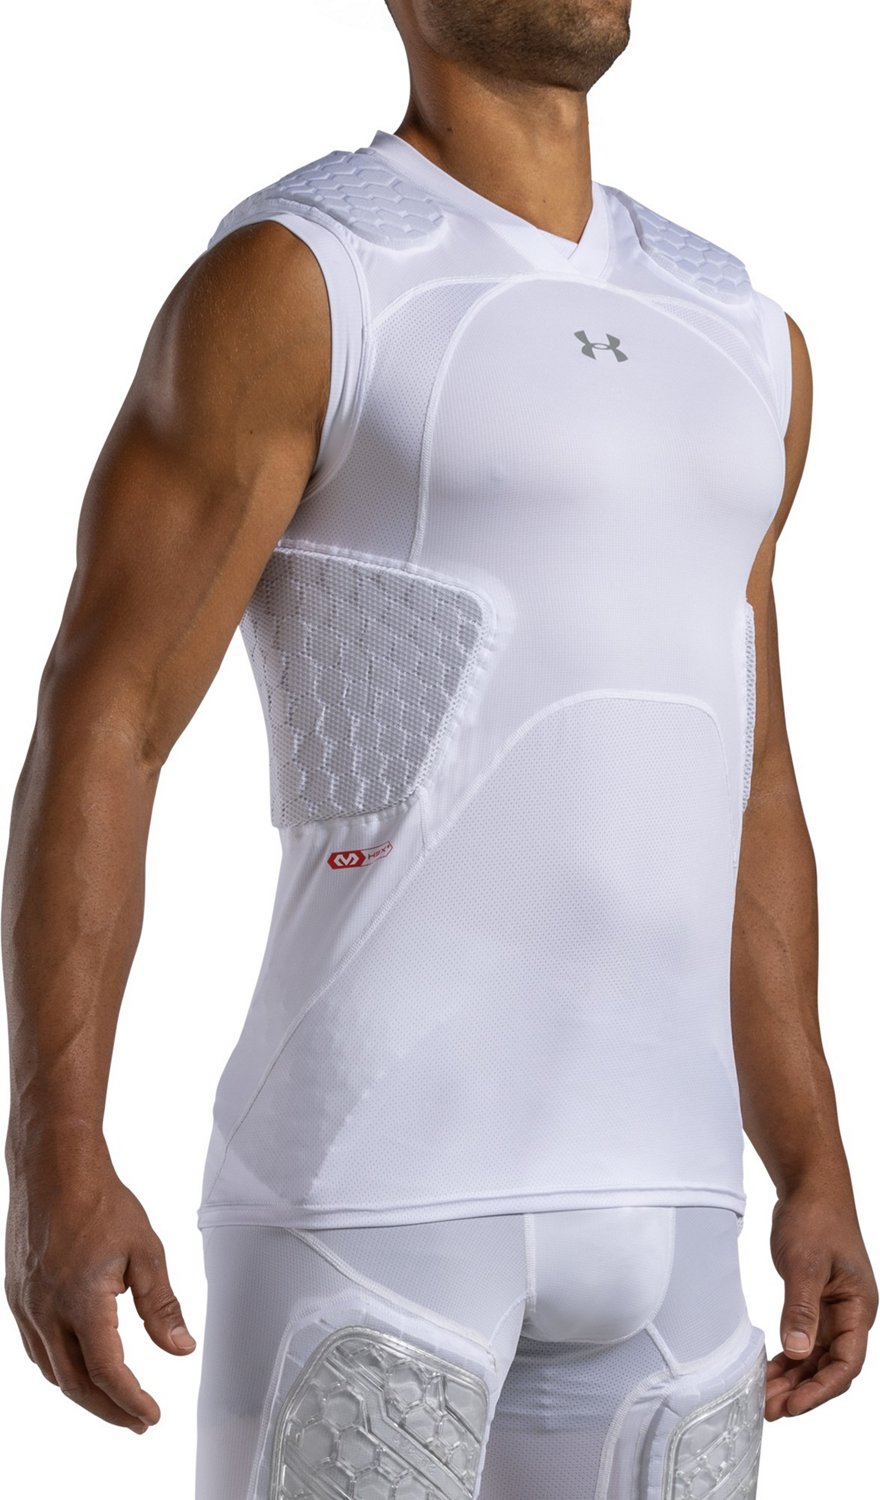 Under Armour Adults Gameday Armour Pro 5-Pad Top Base Layer